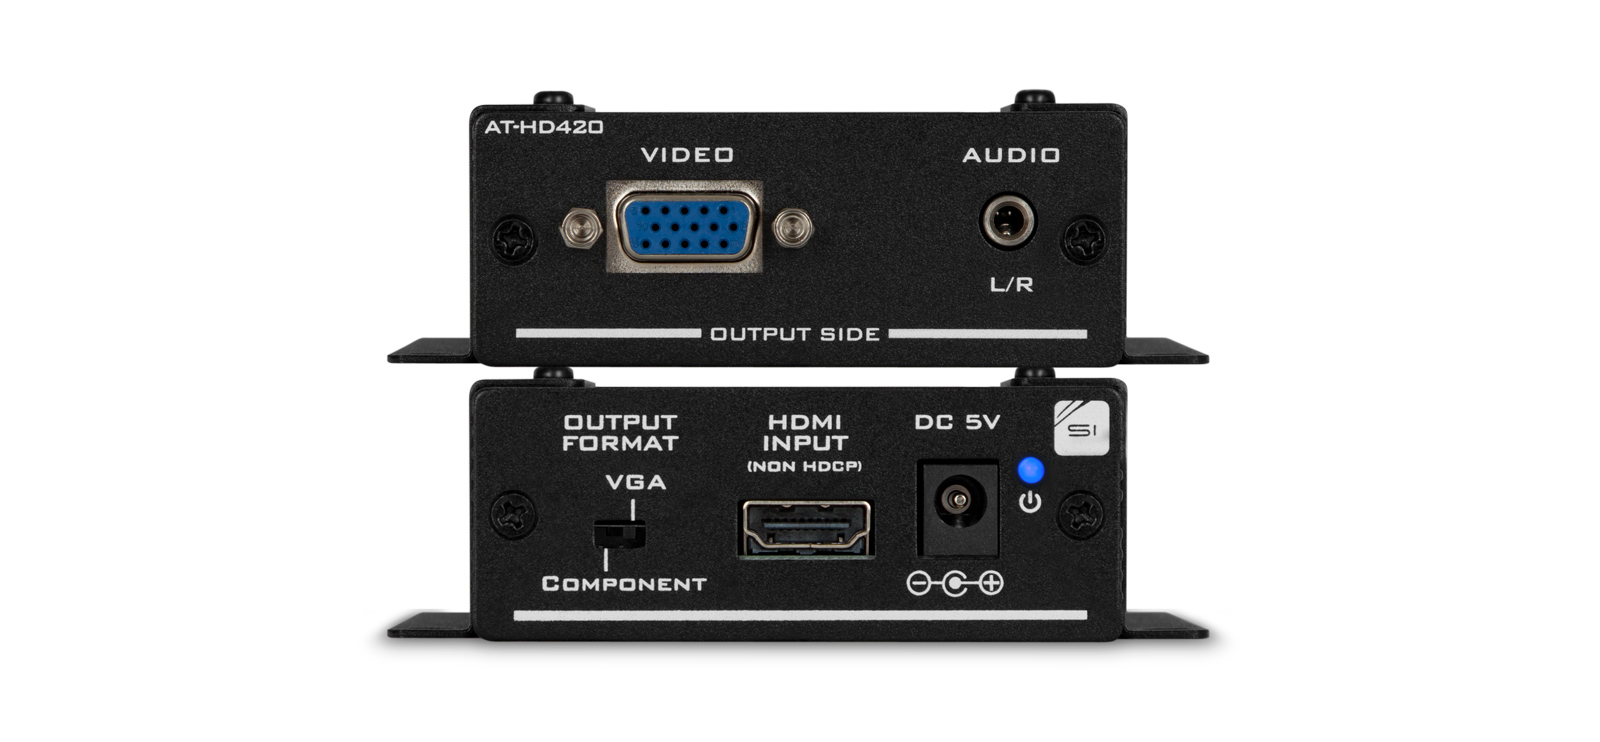 HDMI to VGA/Component and Audio